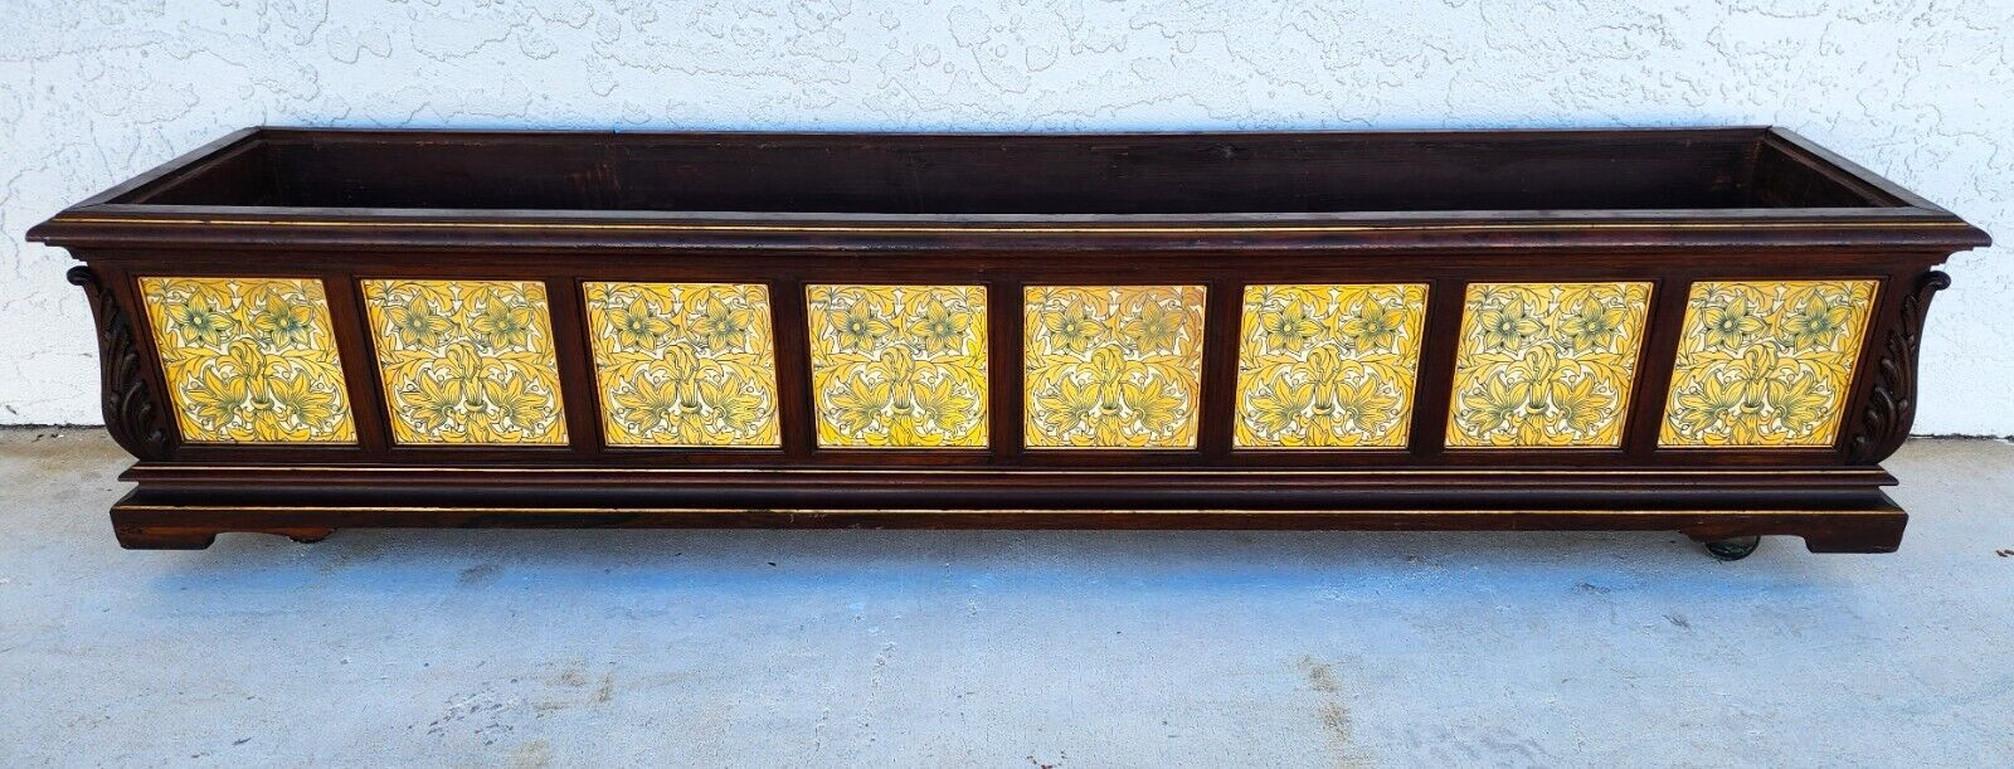 Antique English Tile & Mahogany Planter Rolling 1930's In Good Condition For Sale In Lake Worth, FL